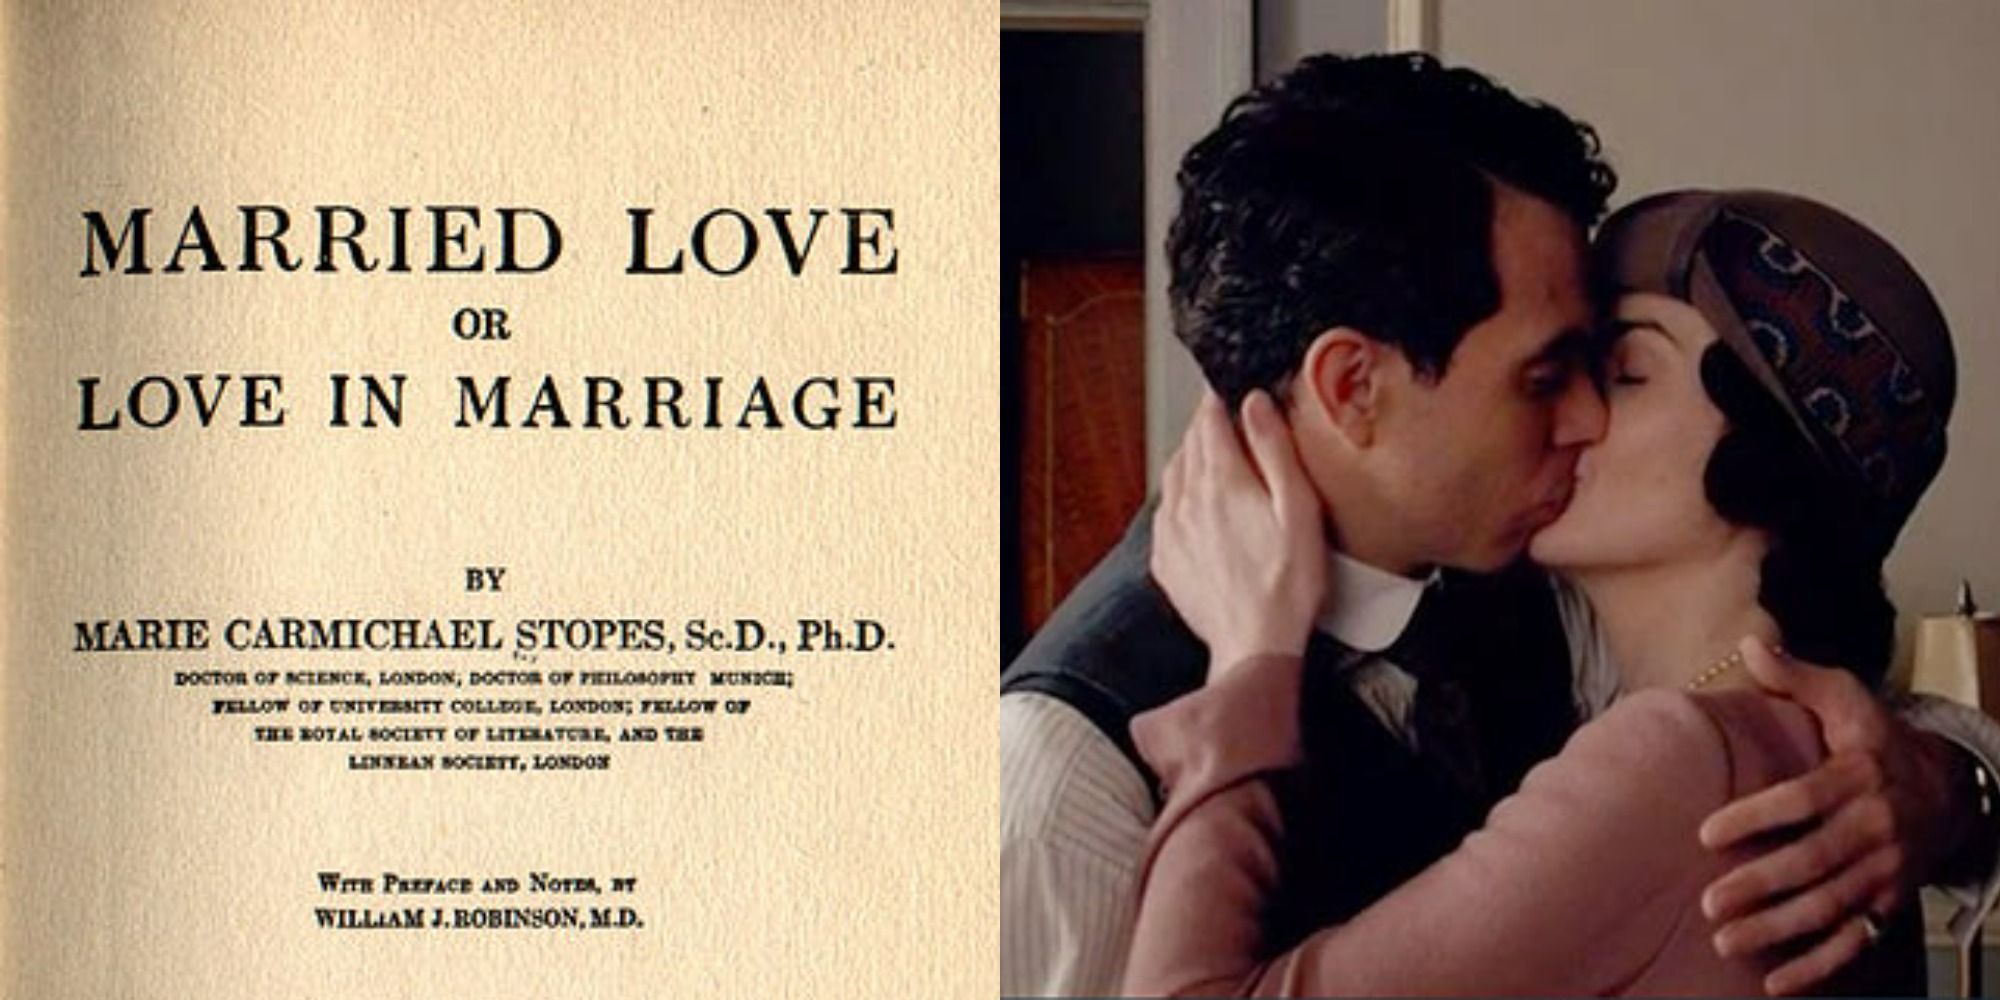 'Married Love' by Marie Stopes on 'Downton Abbey'